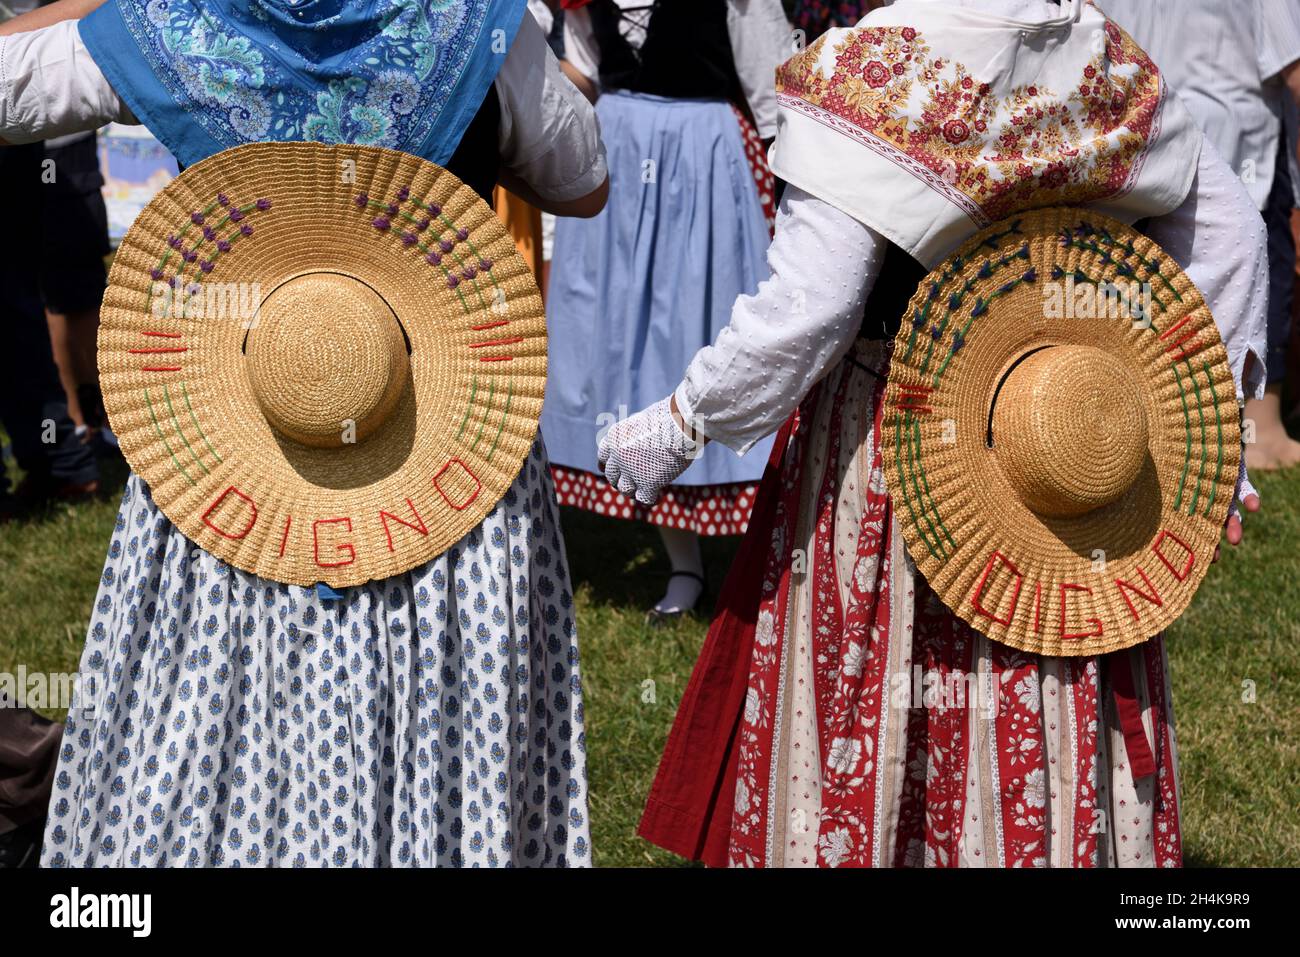 Two Women or Provencal Folk Dancers wearing Traditional Folk Costume at Summer Folklore Festival Provence France Stock Photo